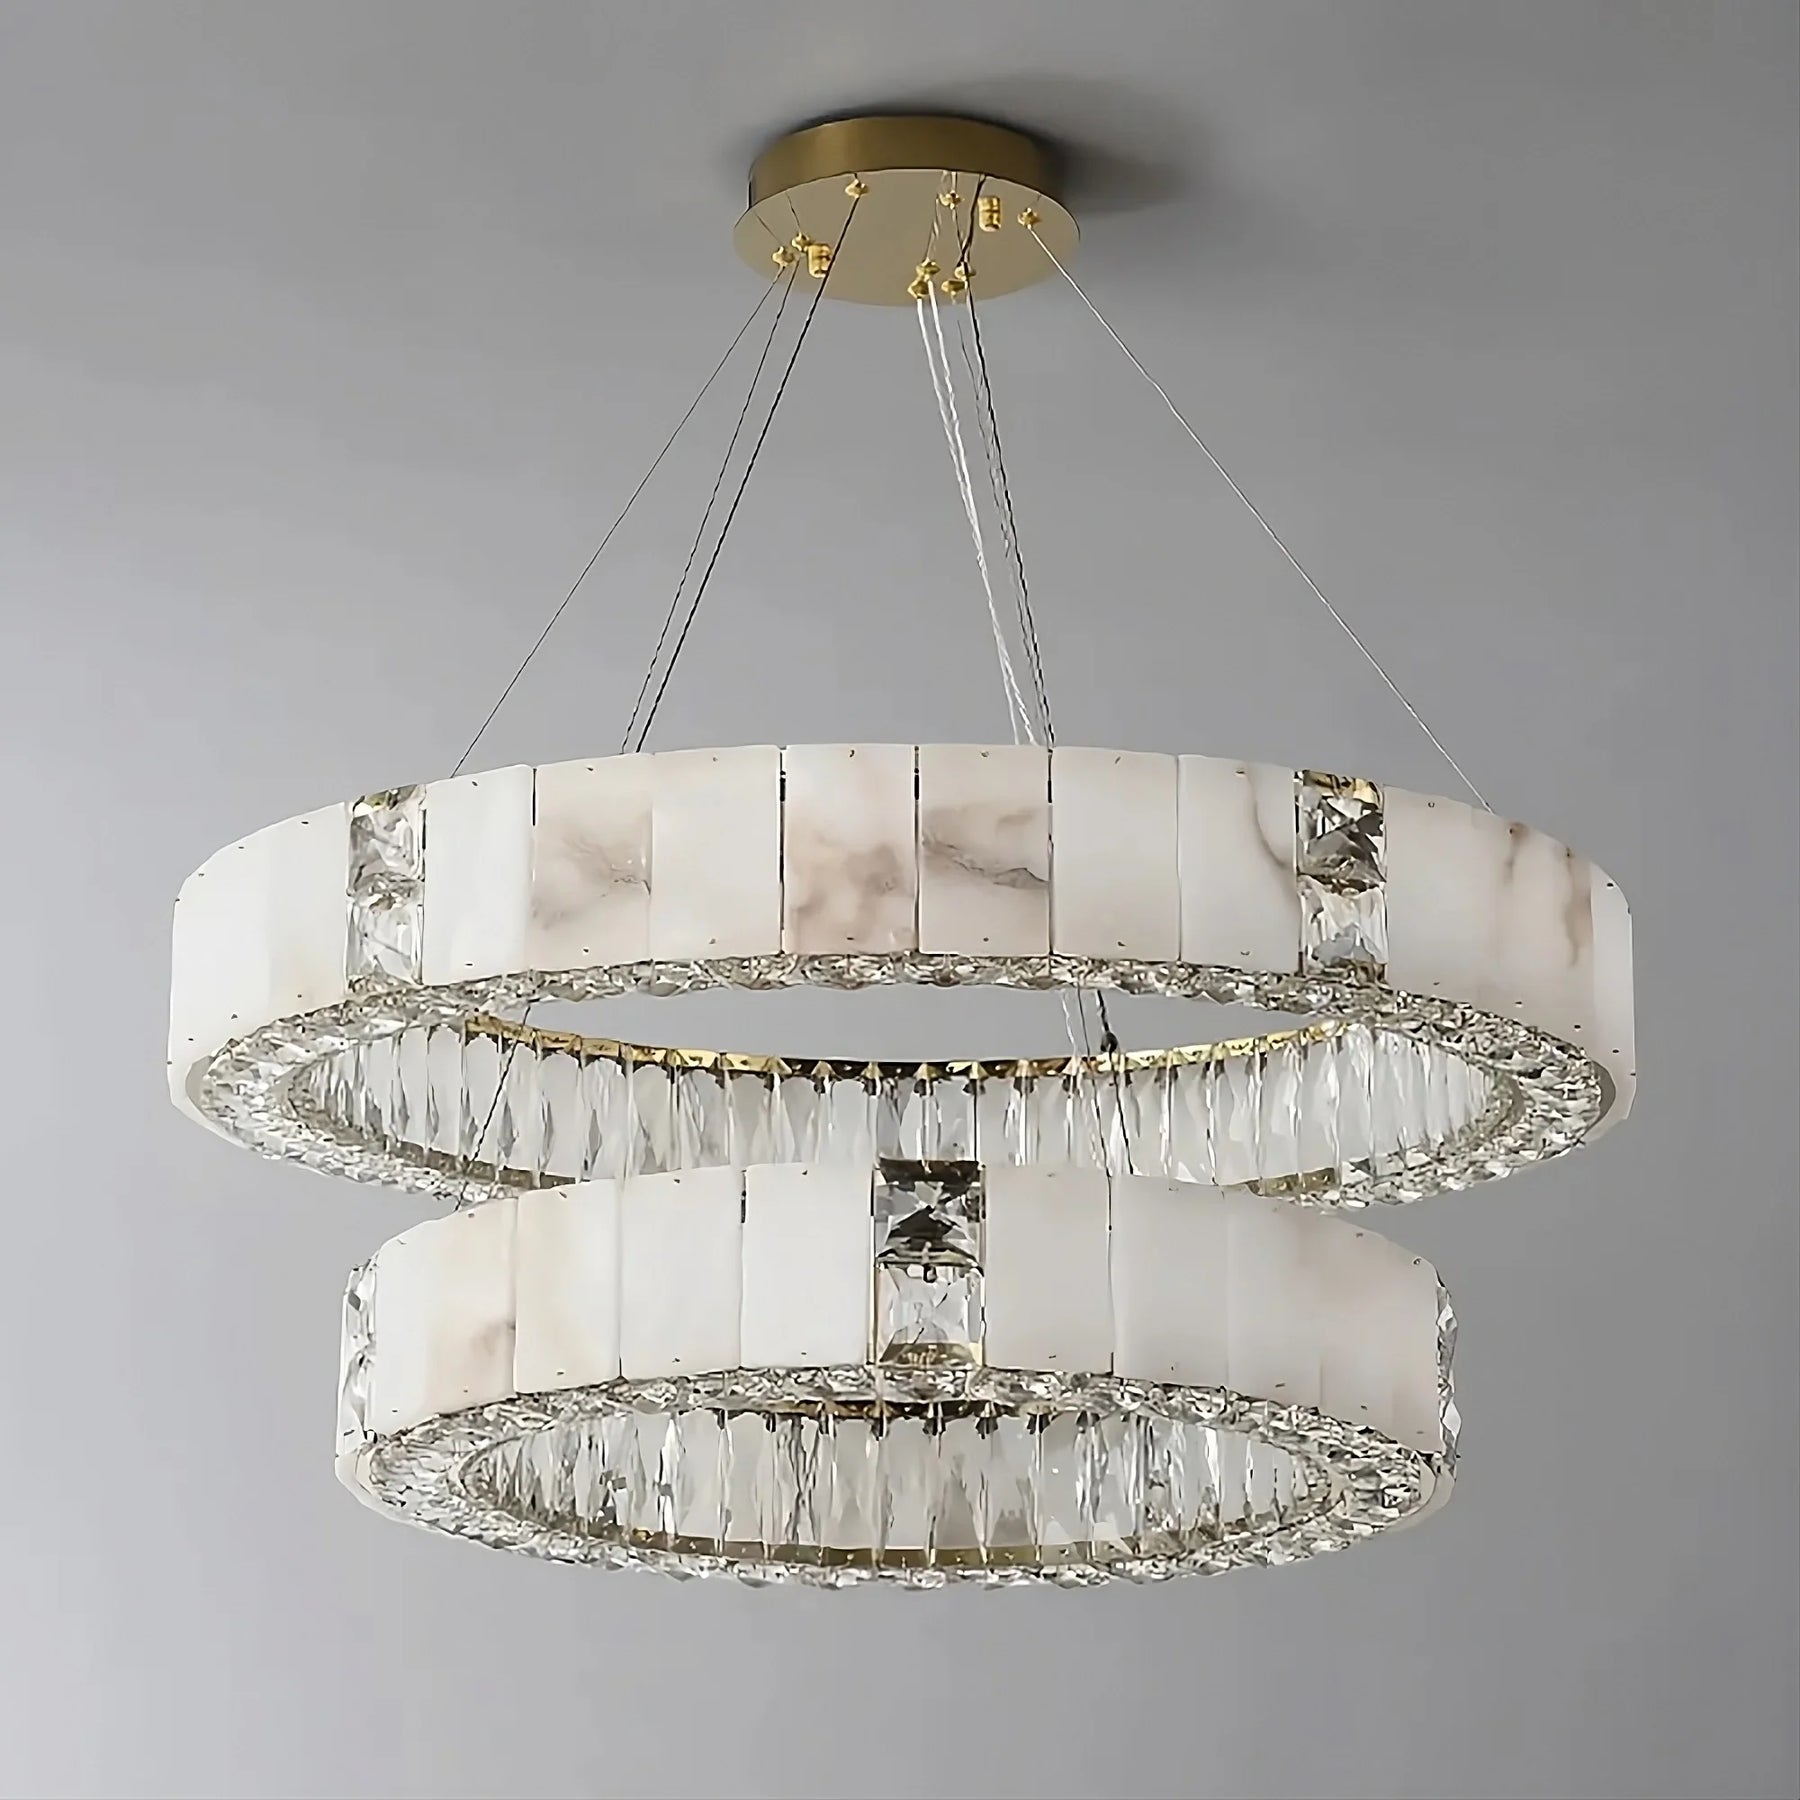 A Natural Marble & Crystal Modern Ceiling Light Fixture from Morsale.com with two circular tiers hangs from a gold base. Each tier is adorned with rectangular translucent panels at the top and a row of crystal-like prisms underneath, creating a luxurious and sophisticated lighting fixture perfect for luxury home décor.